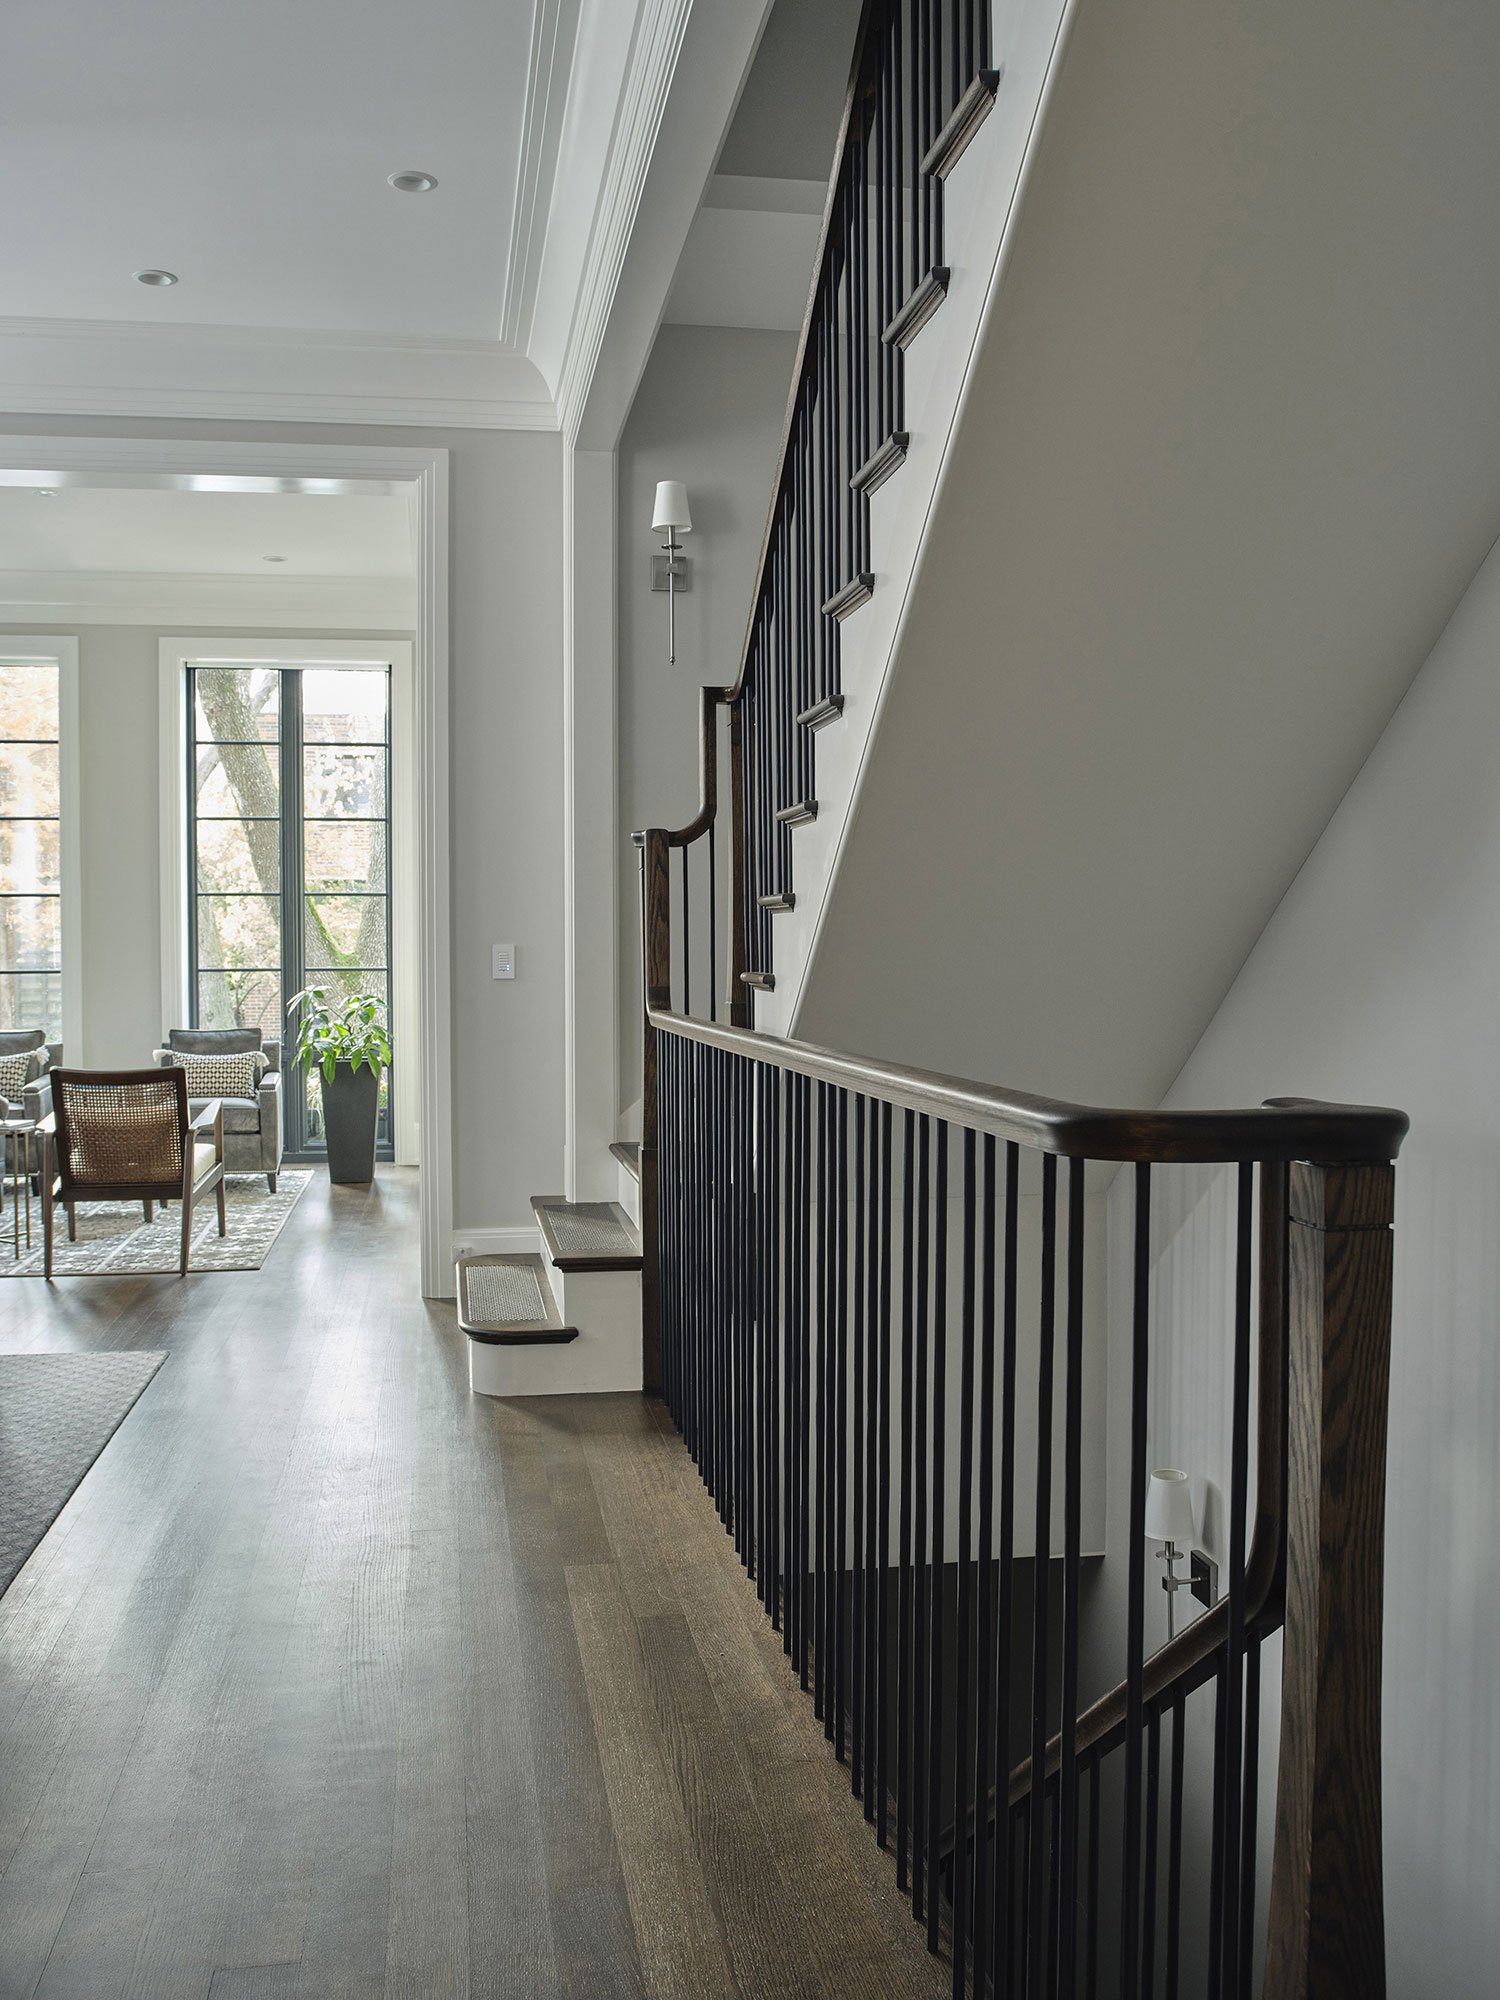 LR-Epic-Design_Howe-St_016_stairwell-and-view-to-living-room.jpg